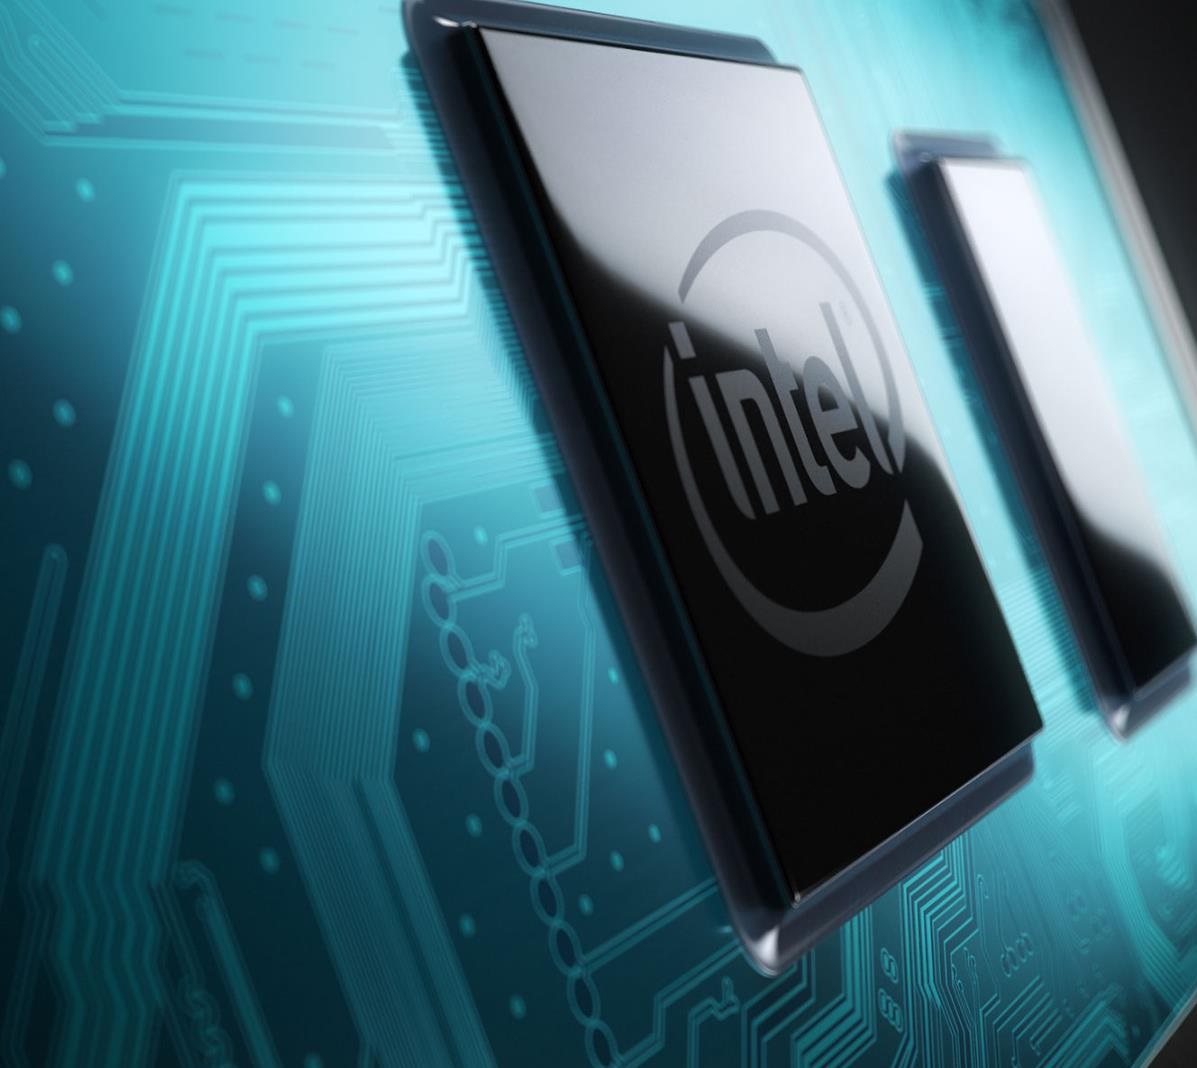 Leaked Intel Alder Lake mobile processor details unveil three new processor segments, including a 55W option and Core i9 processors for thin and light laptops